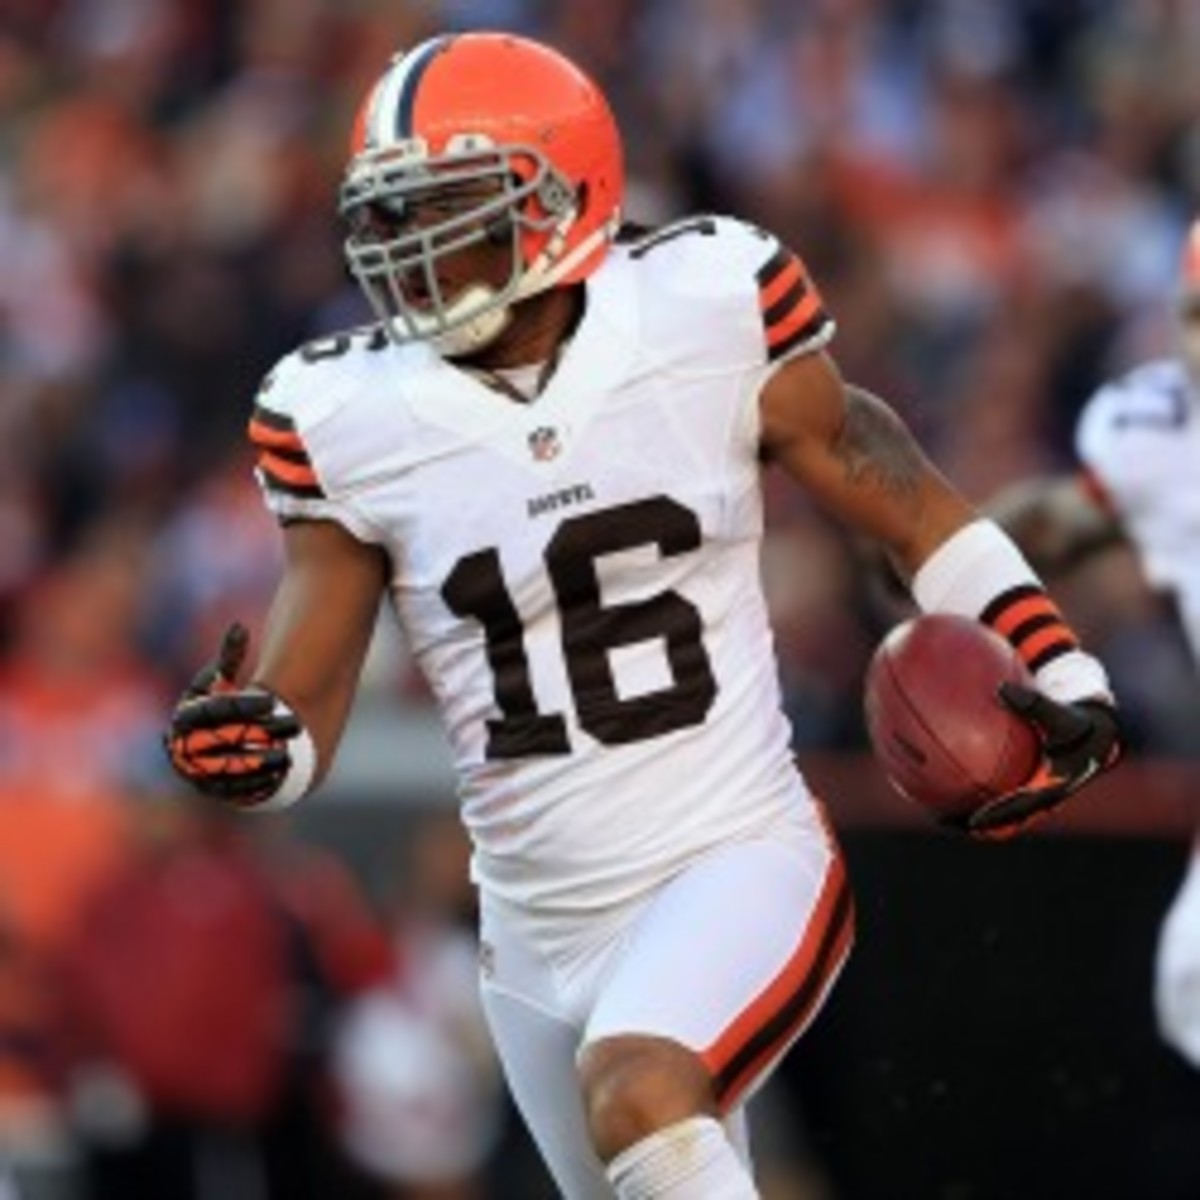 The Cardinals and kick returner Josh Cribbs agreed to a deal. (Doug Pensinger/Getty Images)